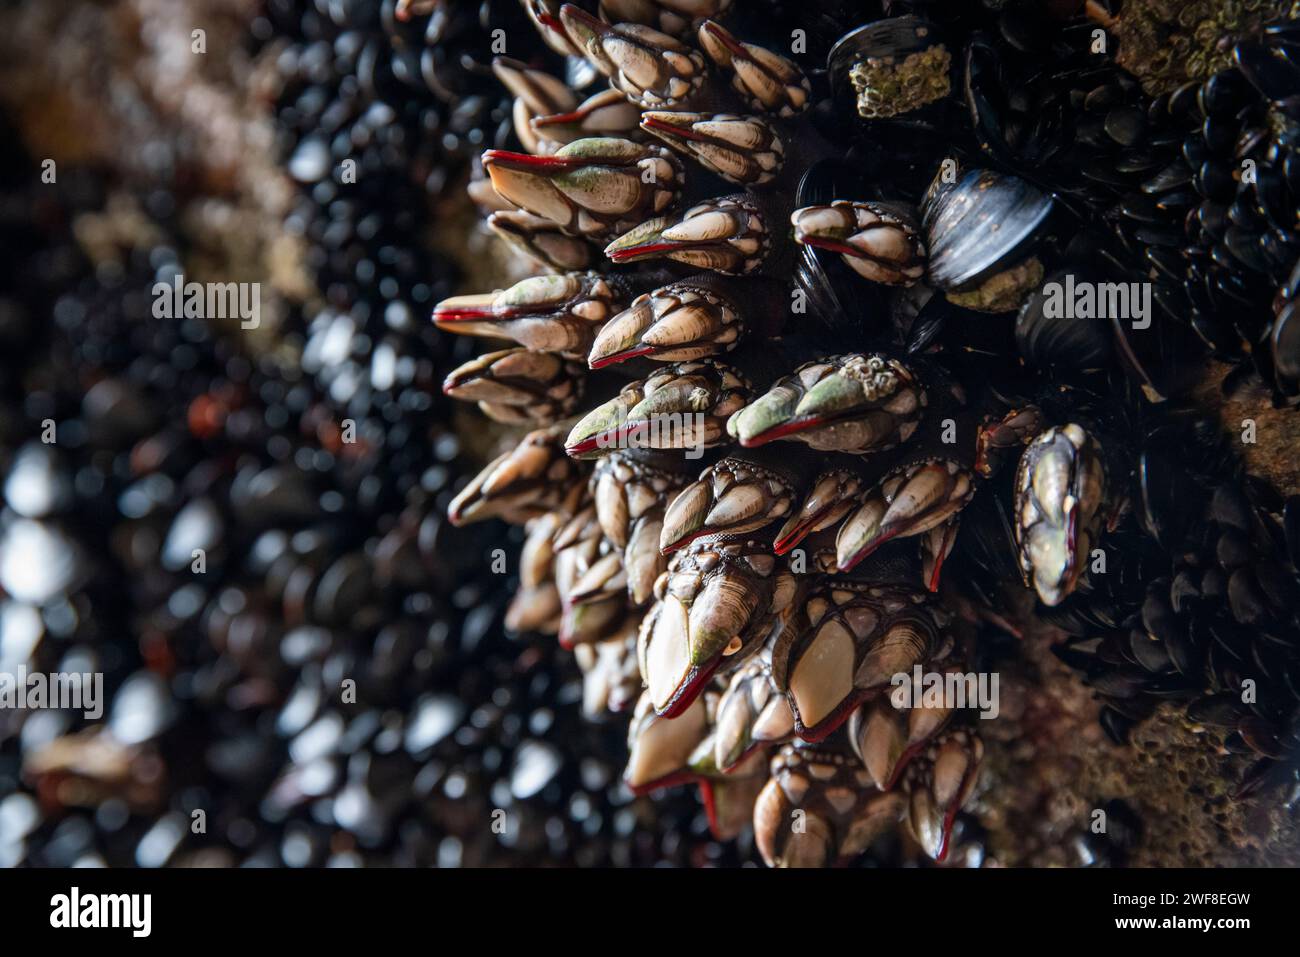 Seafood barnacle clinging to a rock over the ocean. Stock Photo